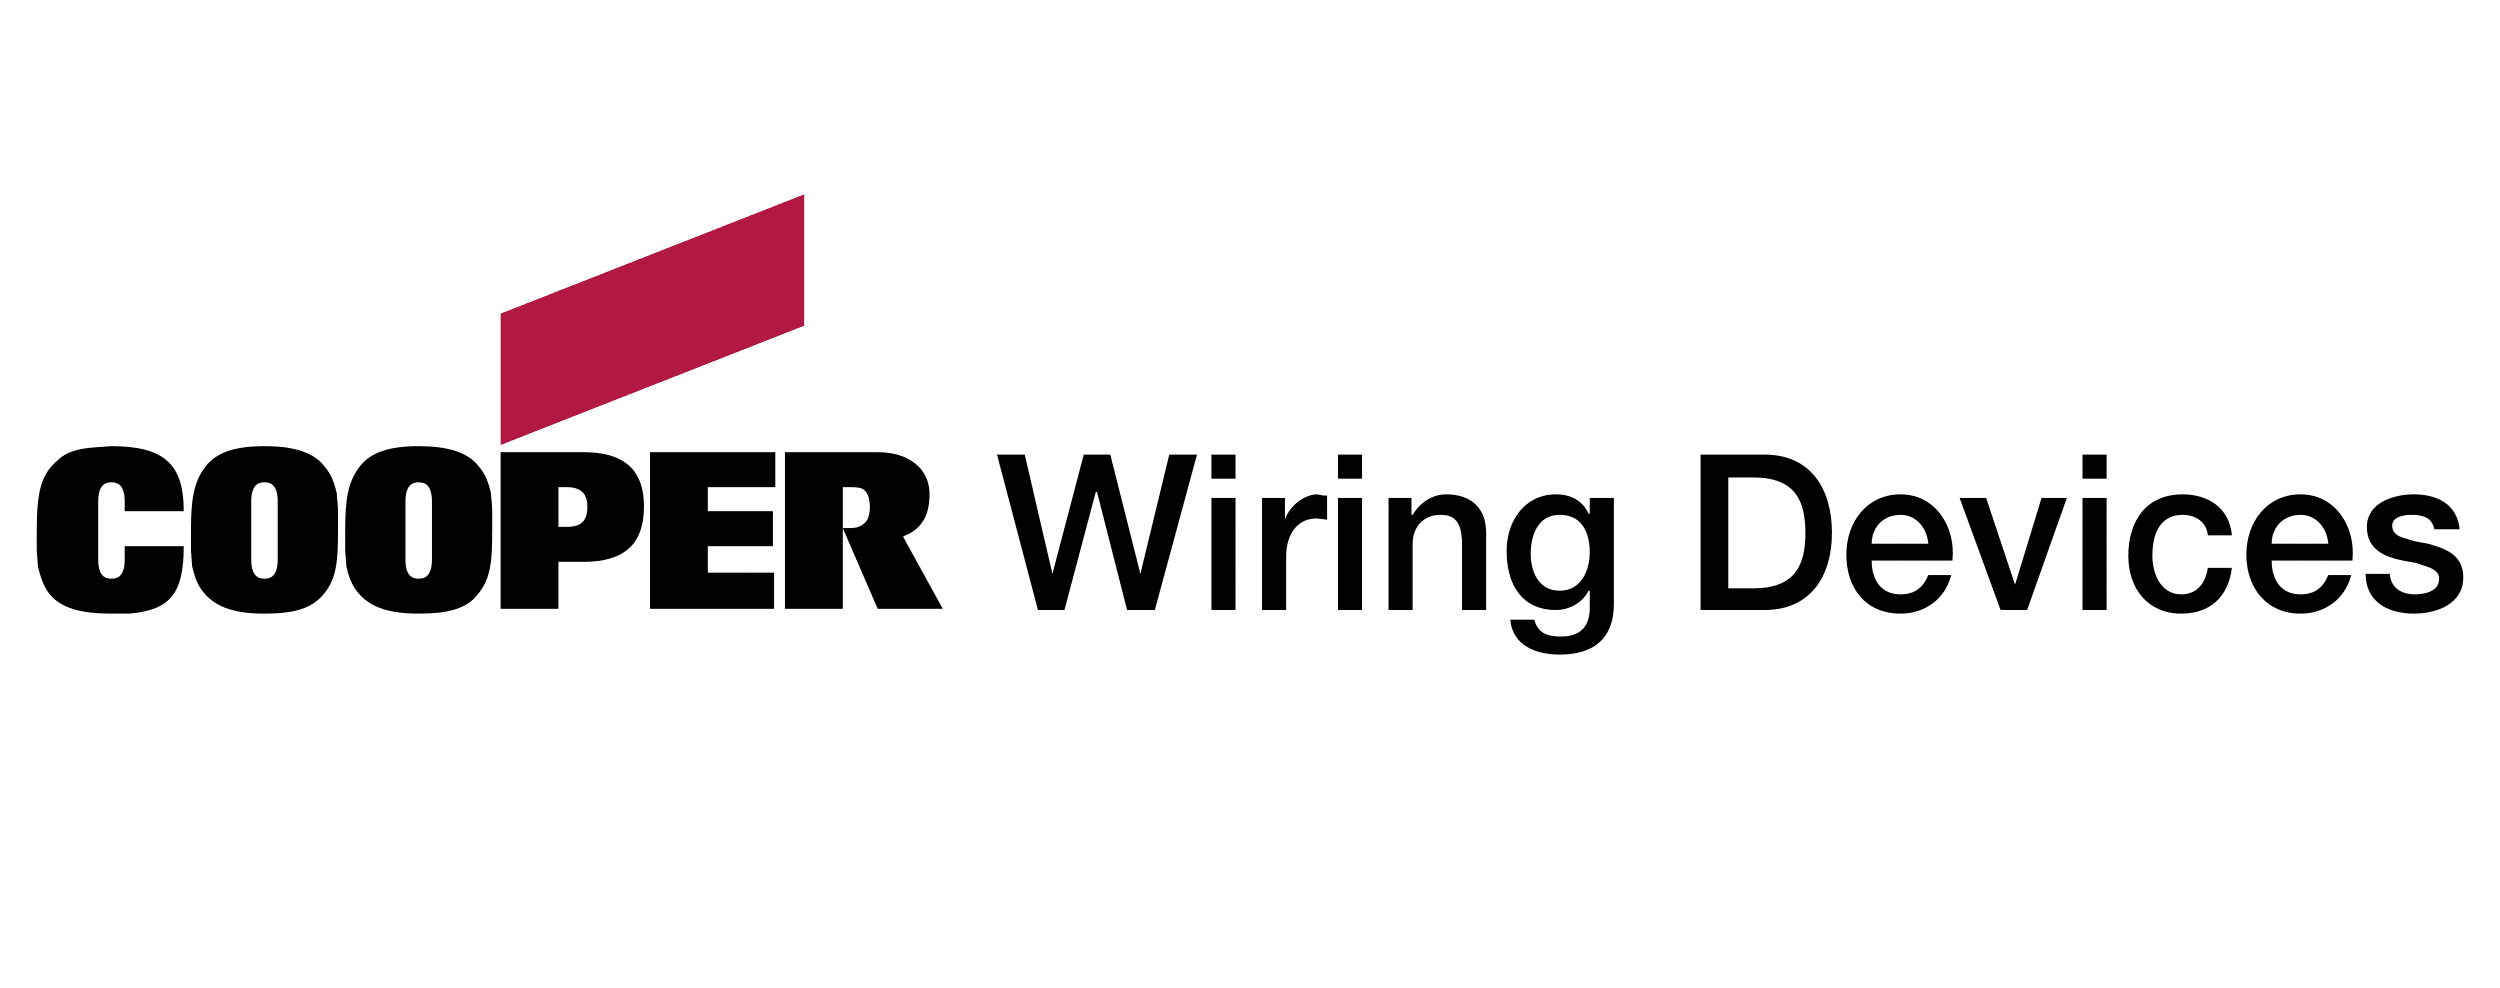 Cooper-Wiring-Devices.png